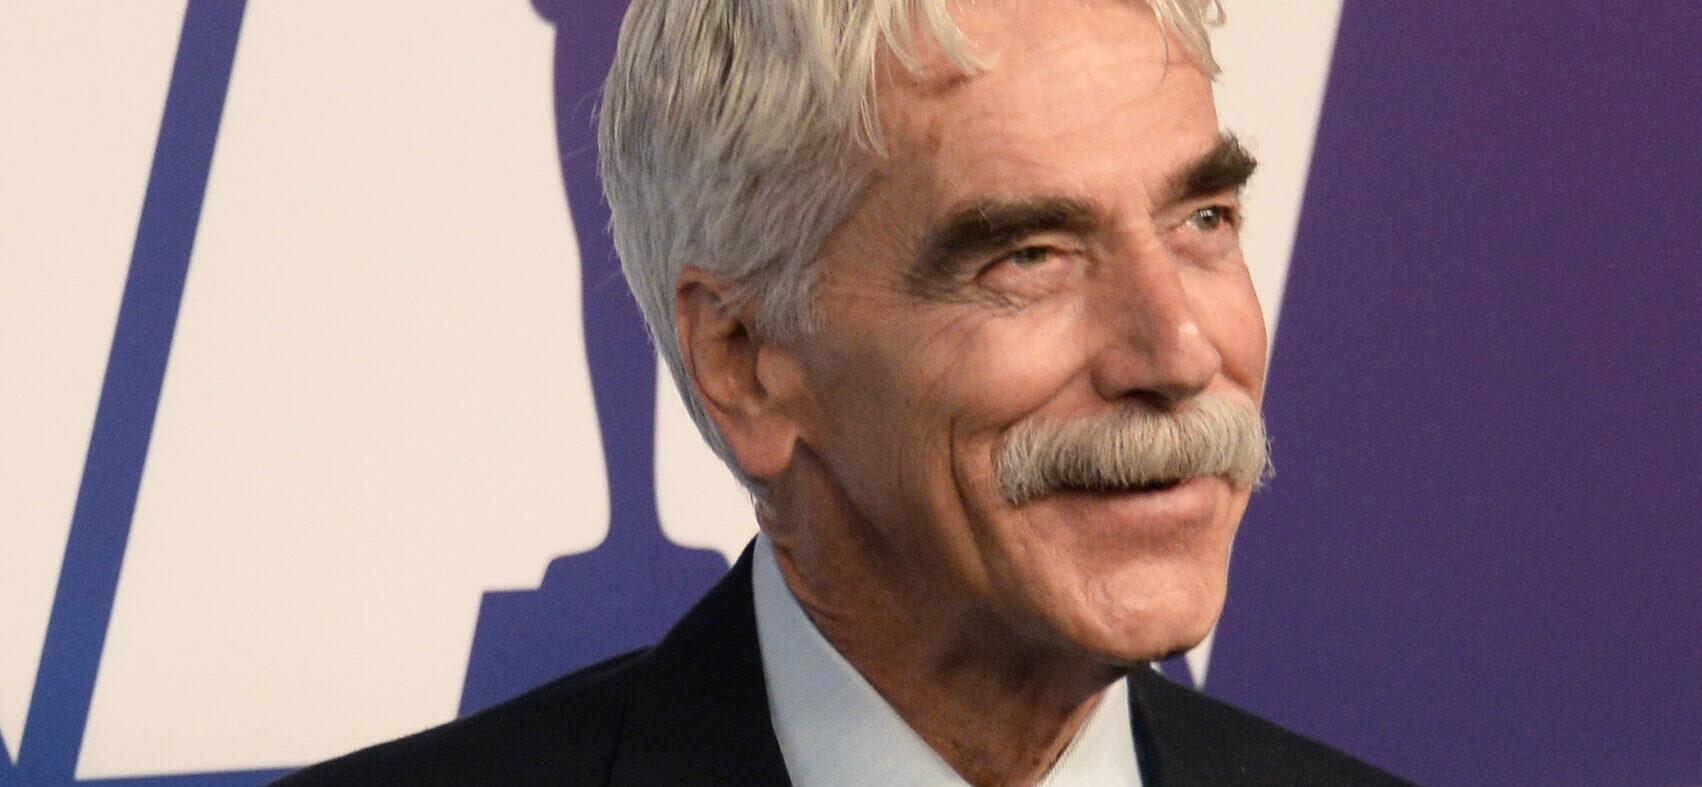 Sam Elliot attends the Oscar nominees luncheon in Beverly Hills